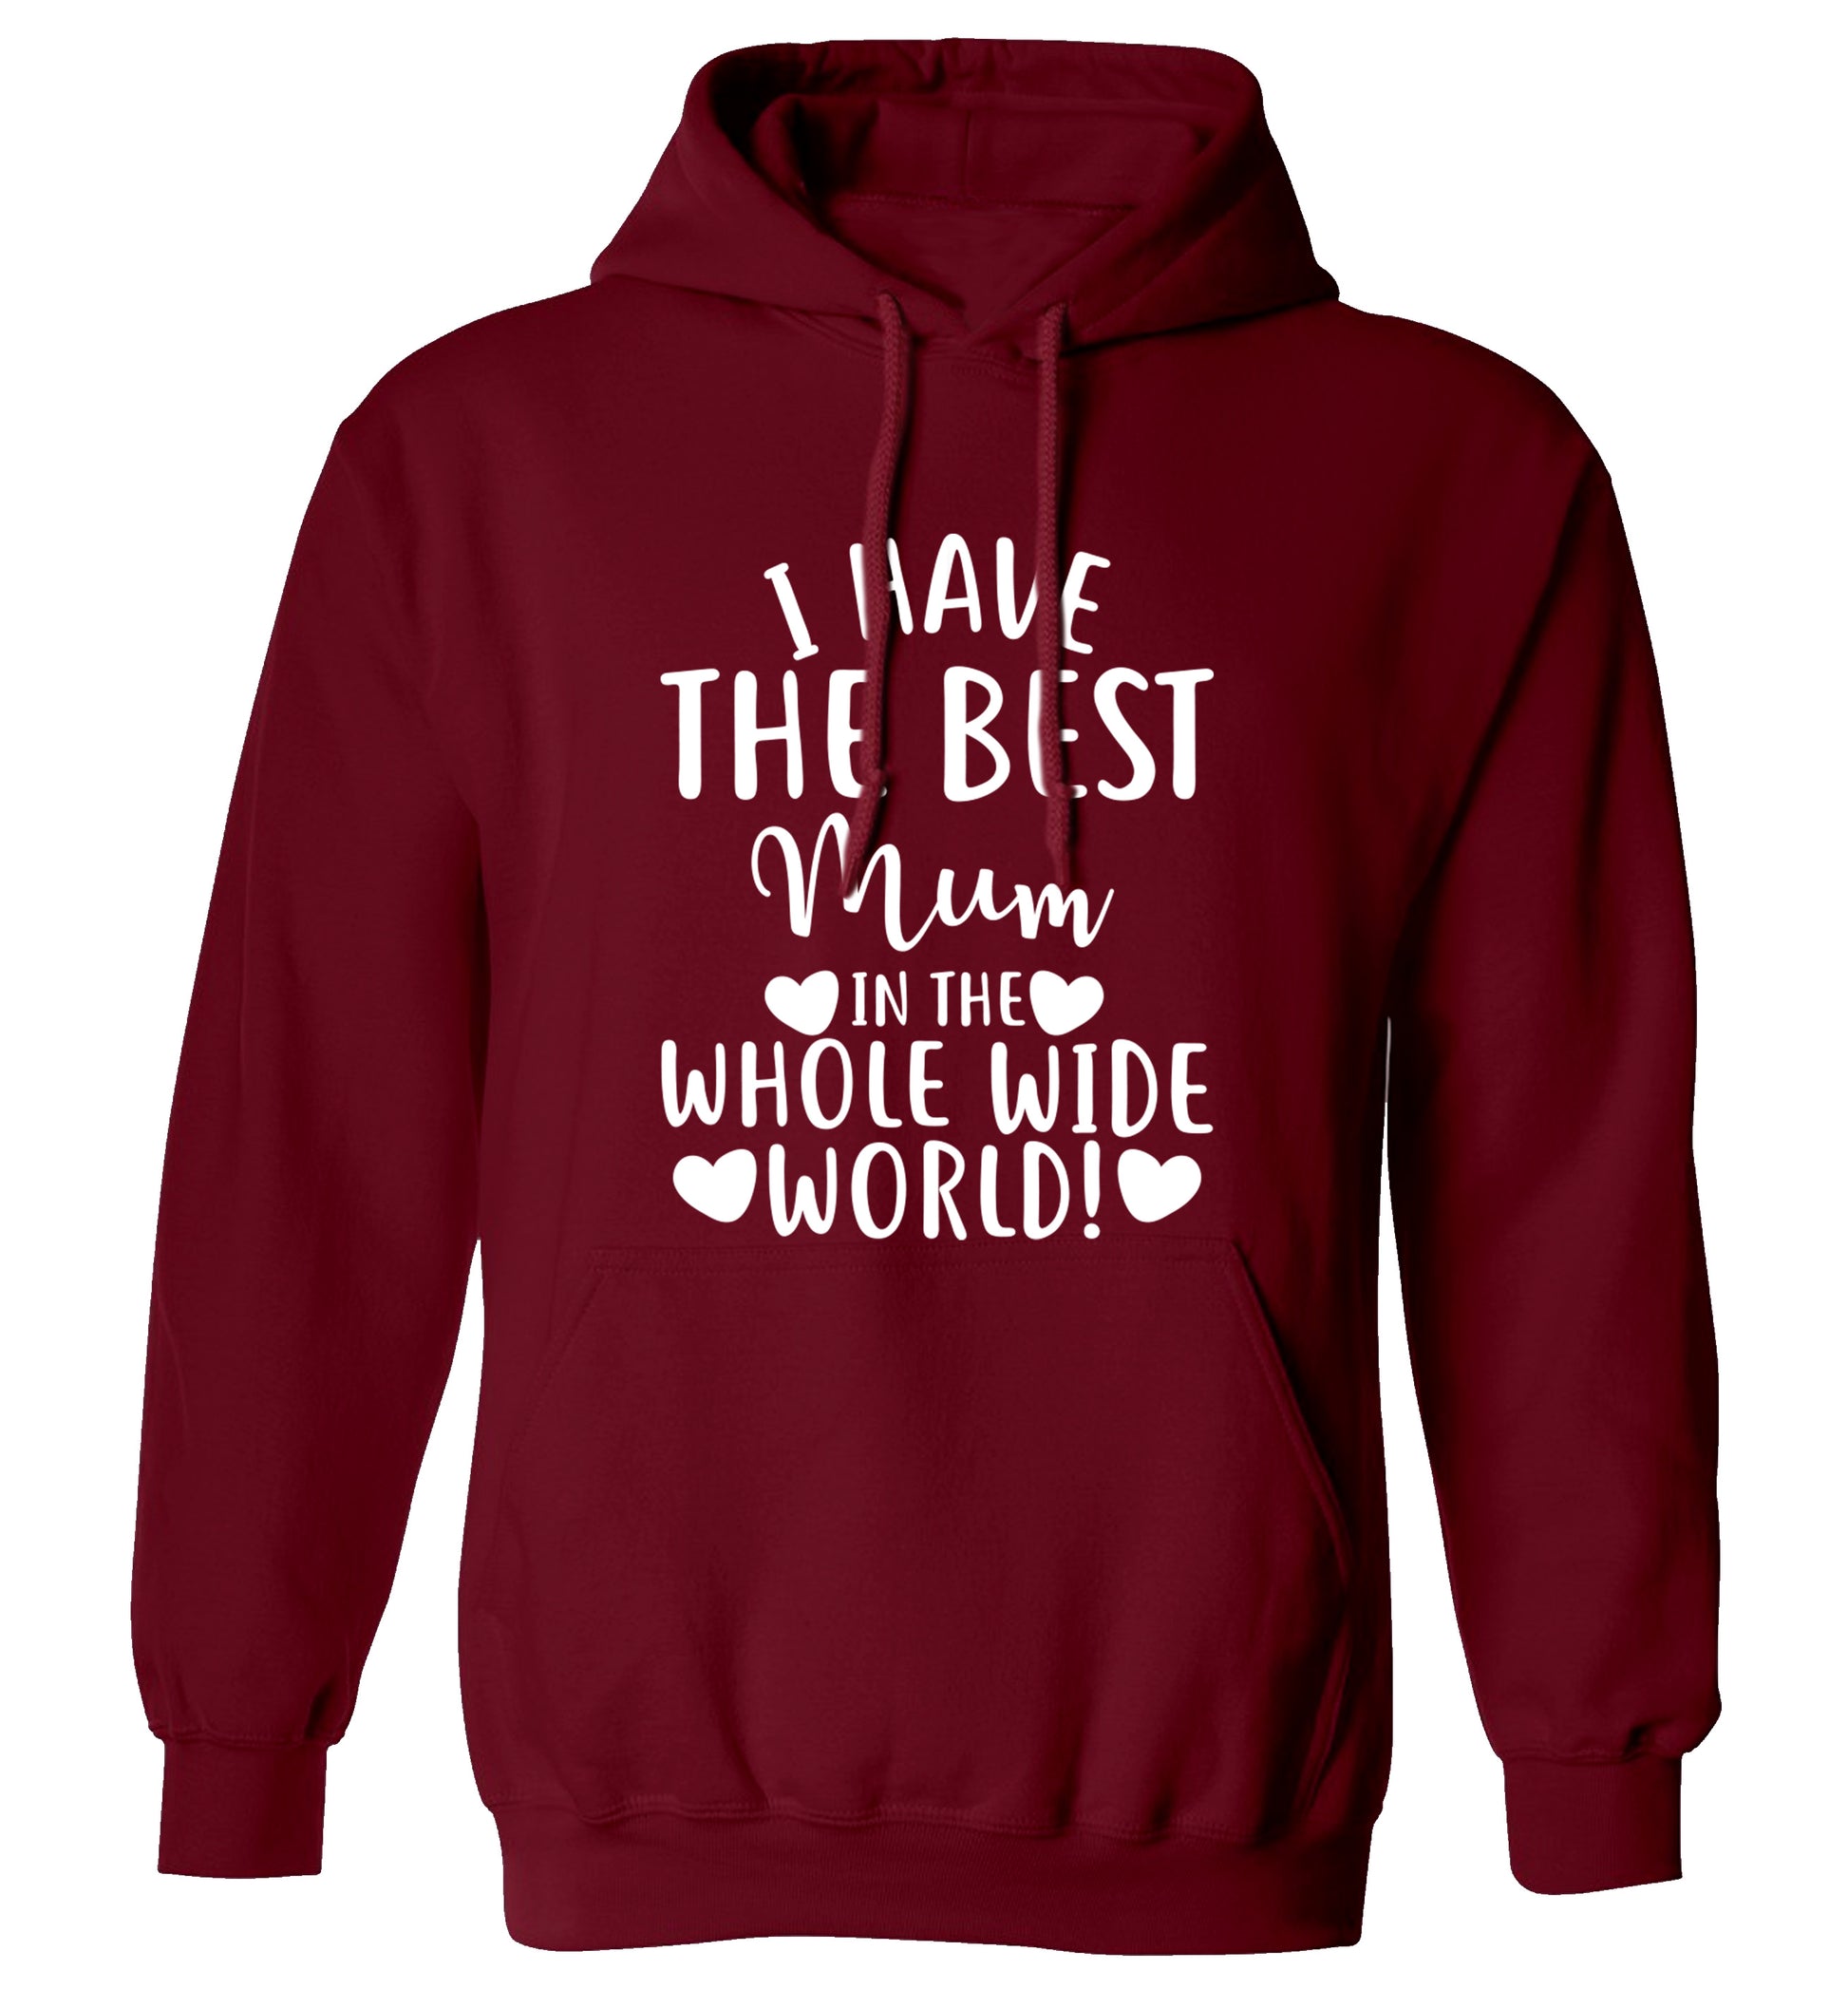 I have the best mum in the whole wide world! adults unisex maroon hoodie 2XL